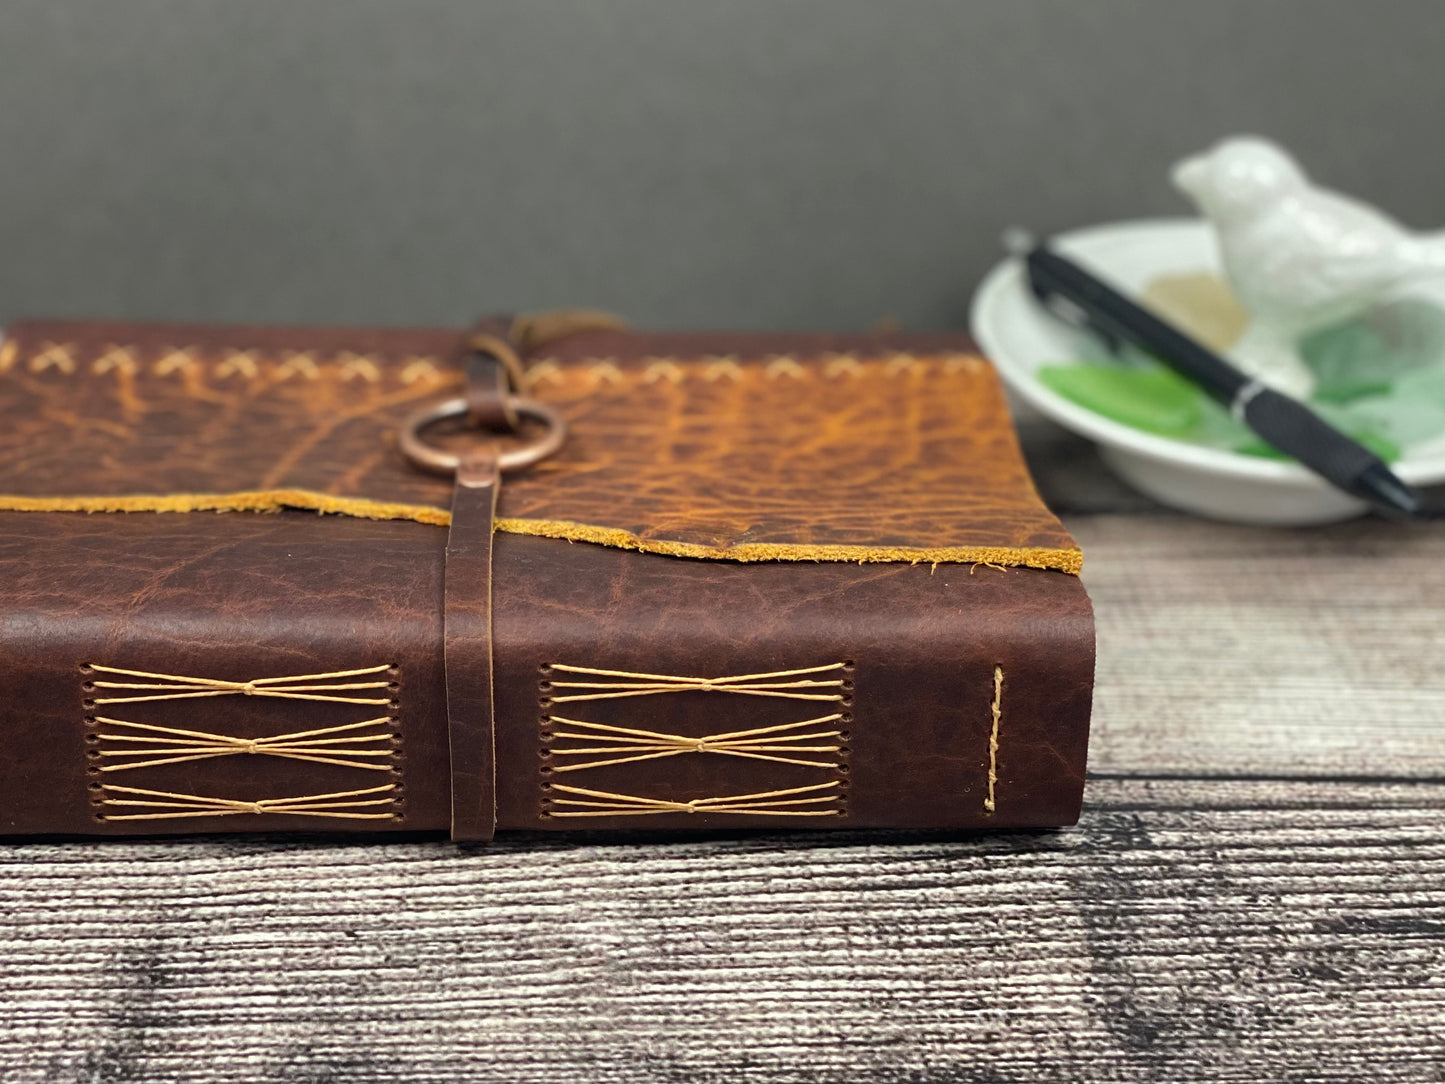 6x8 Leather Journal - Bison Leather with Ring